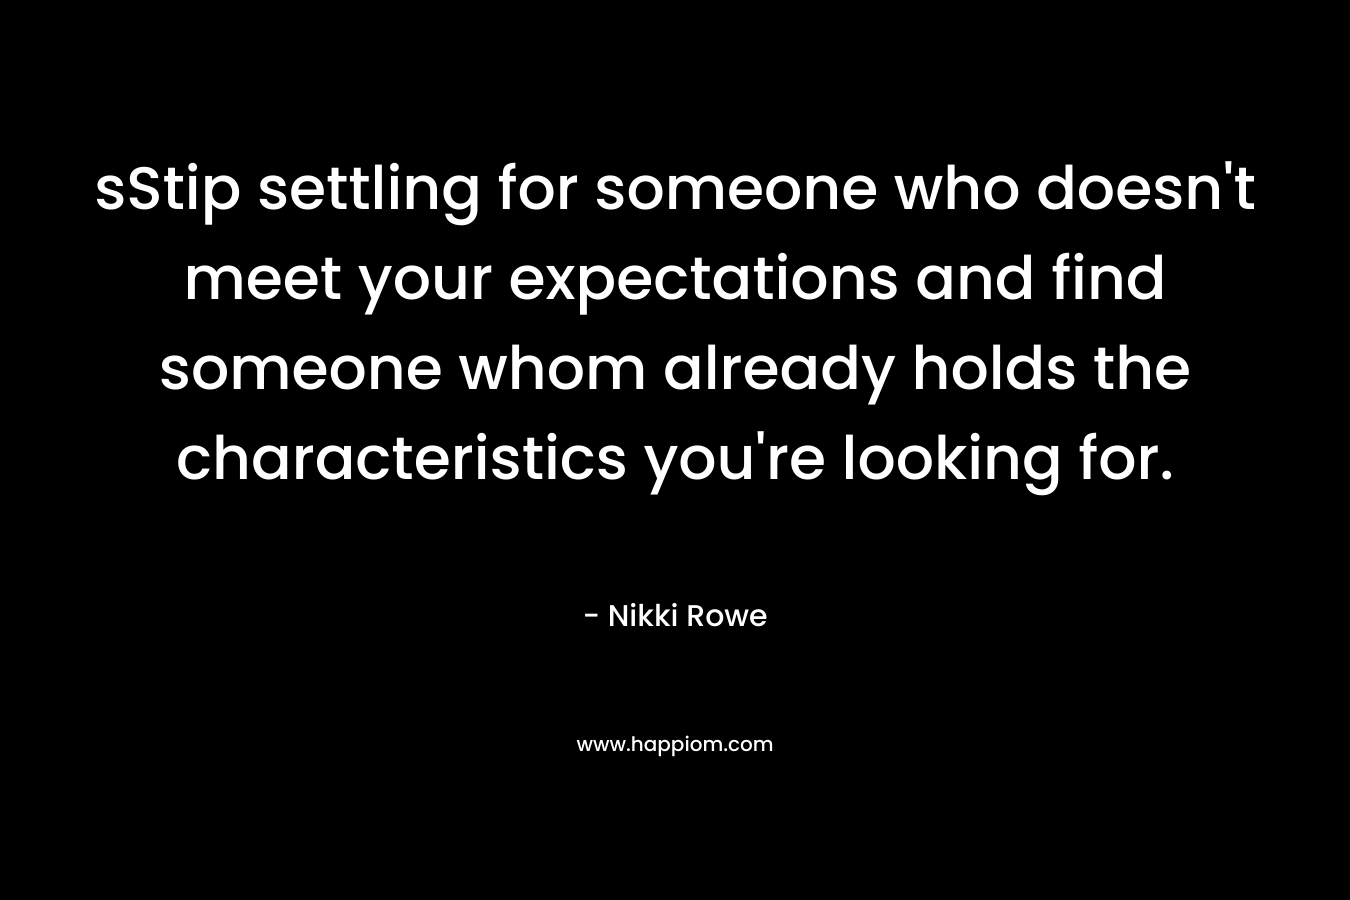 sStip settling for someone who doesn’t meet your expectations and find someone whom already holds the characteristics you’re looking for. – Nikki Rowe